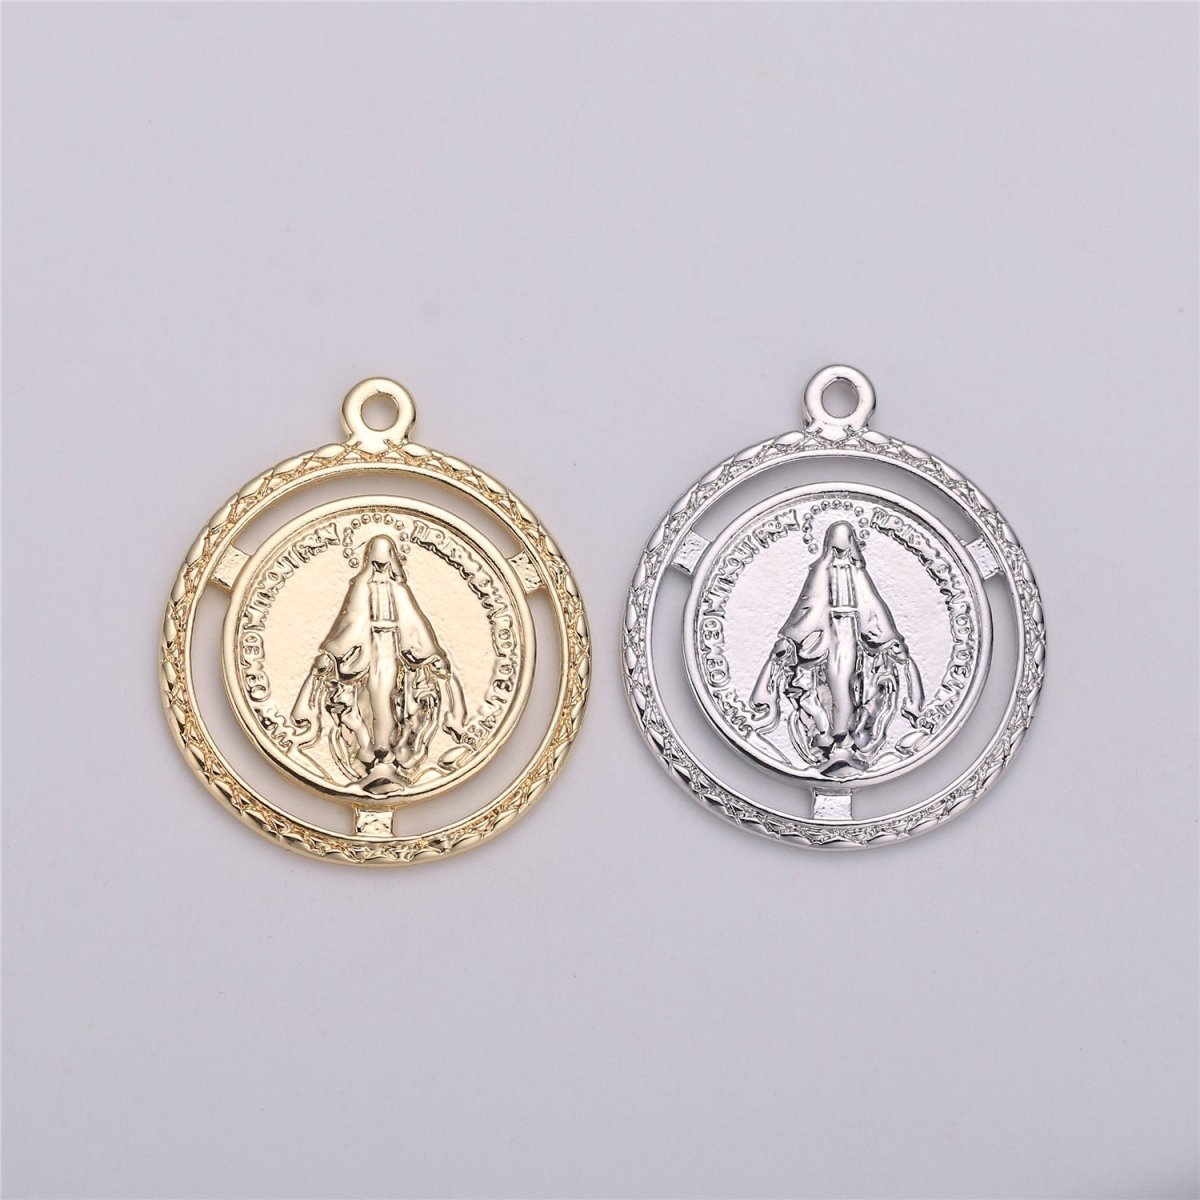 18K Gold Filled Miraculous Lady Medallion Charm with Decorative Edge, Round Coin Pendant Catholic Charm Silver Gold Virgin Mary Charm C-534 - DLUXCA